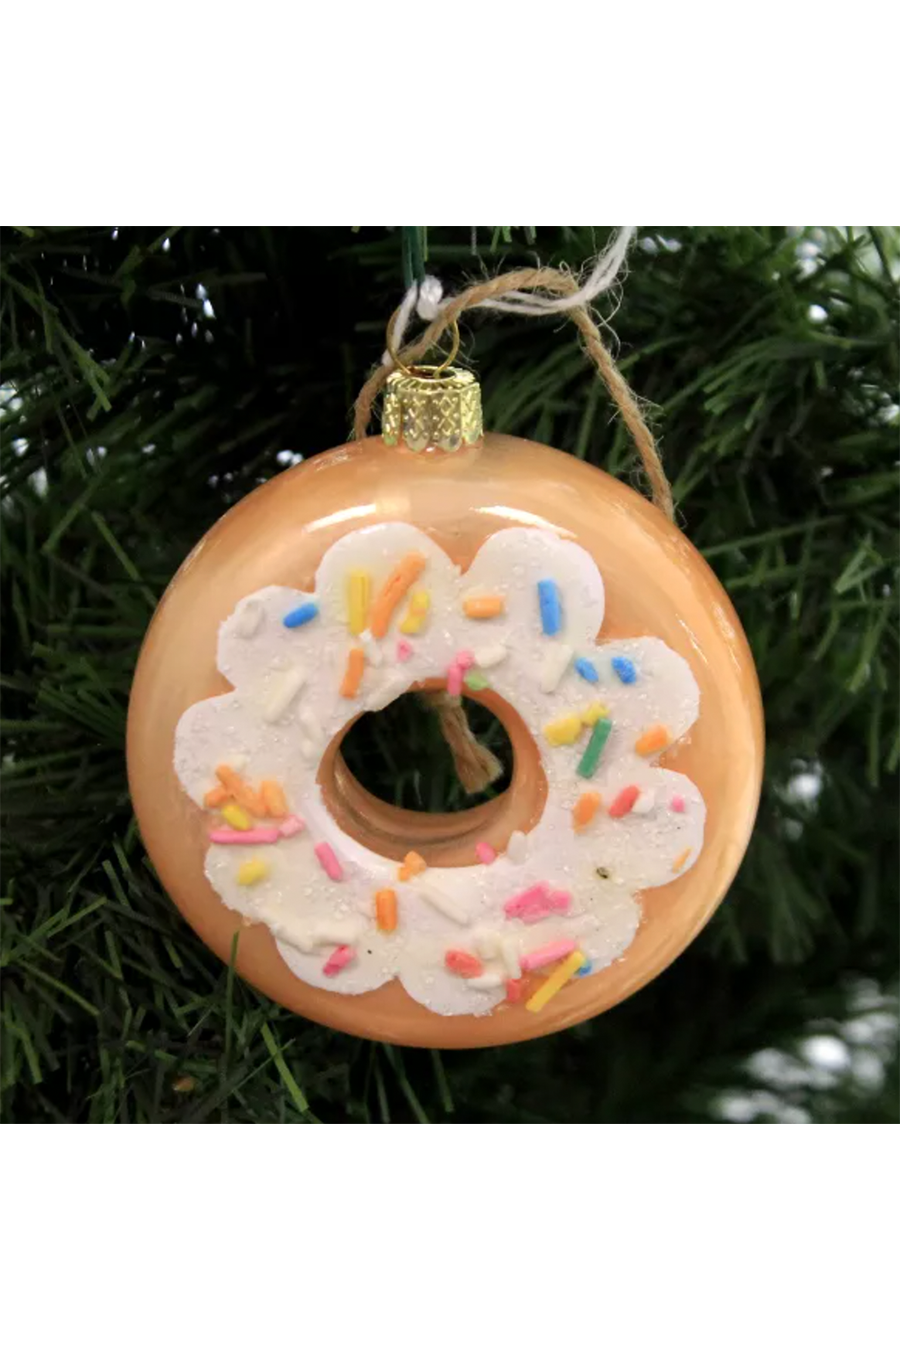 Assorted Donuts Ornament - Main Image Number 1 of 3